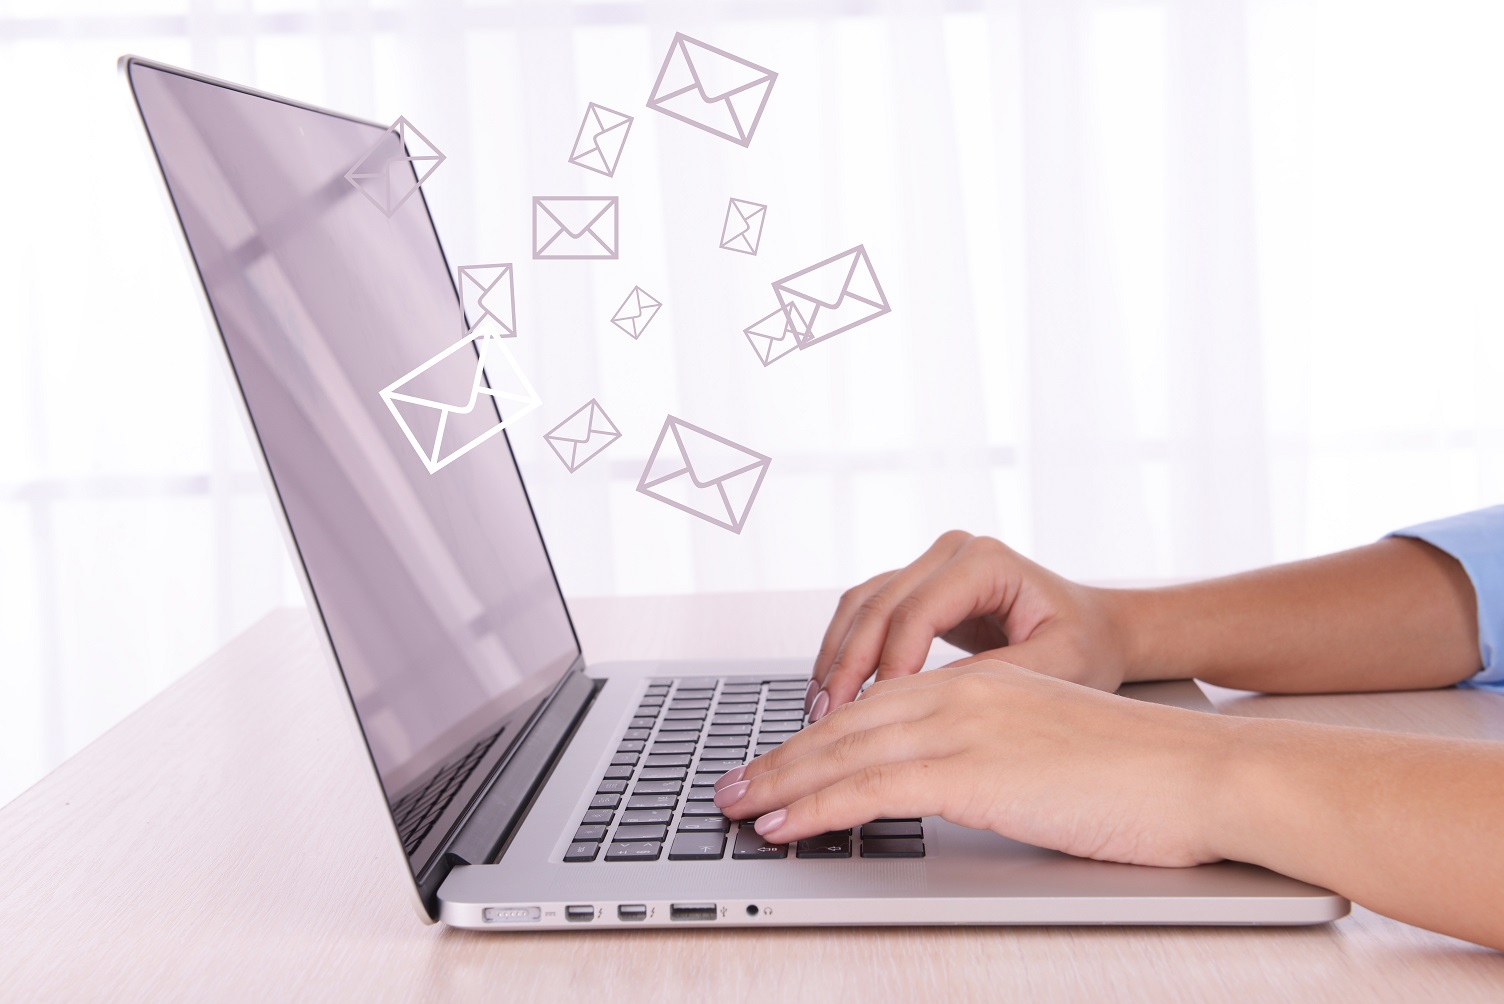 Deploying an email marketing campaign